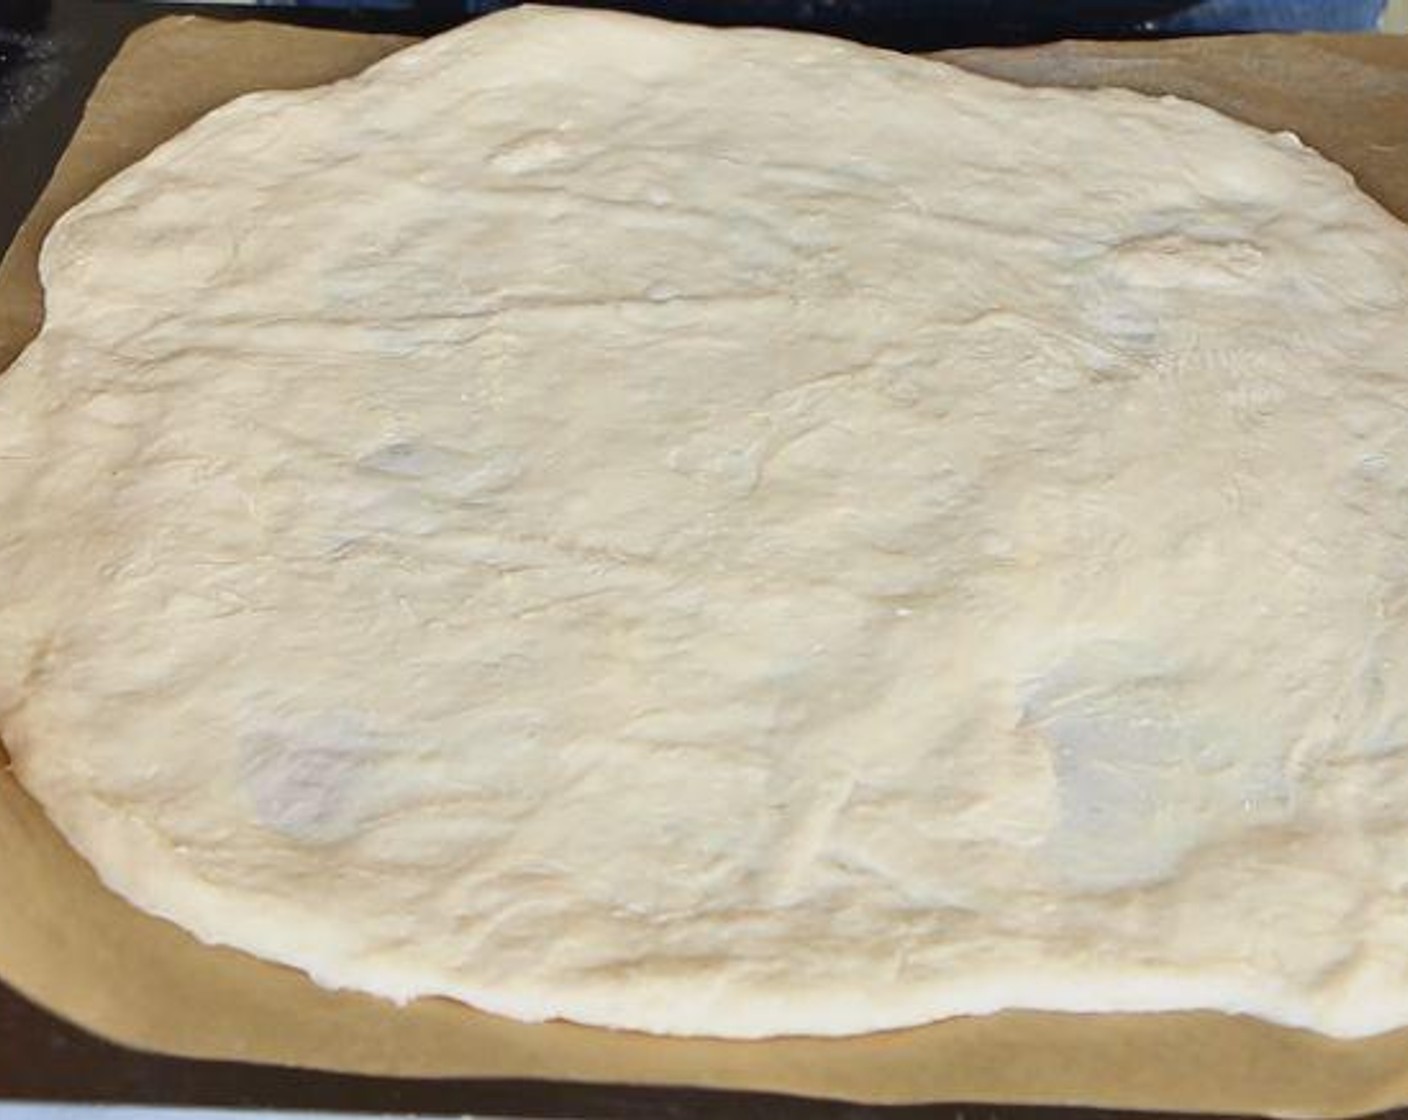 step 2 Roll out the Pizza Dough (1 lb) into a 12-13 inch diameter circle. Line a baking tray with parchment paper and preheat your oven to 450 degrees F (230 degrees C).